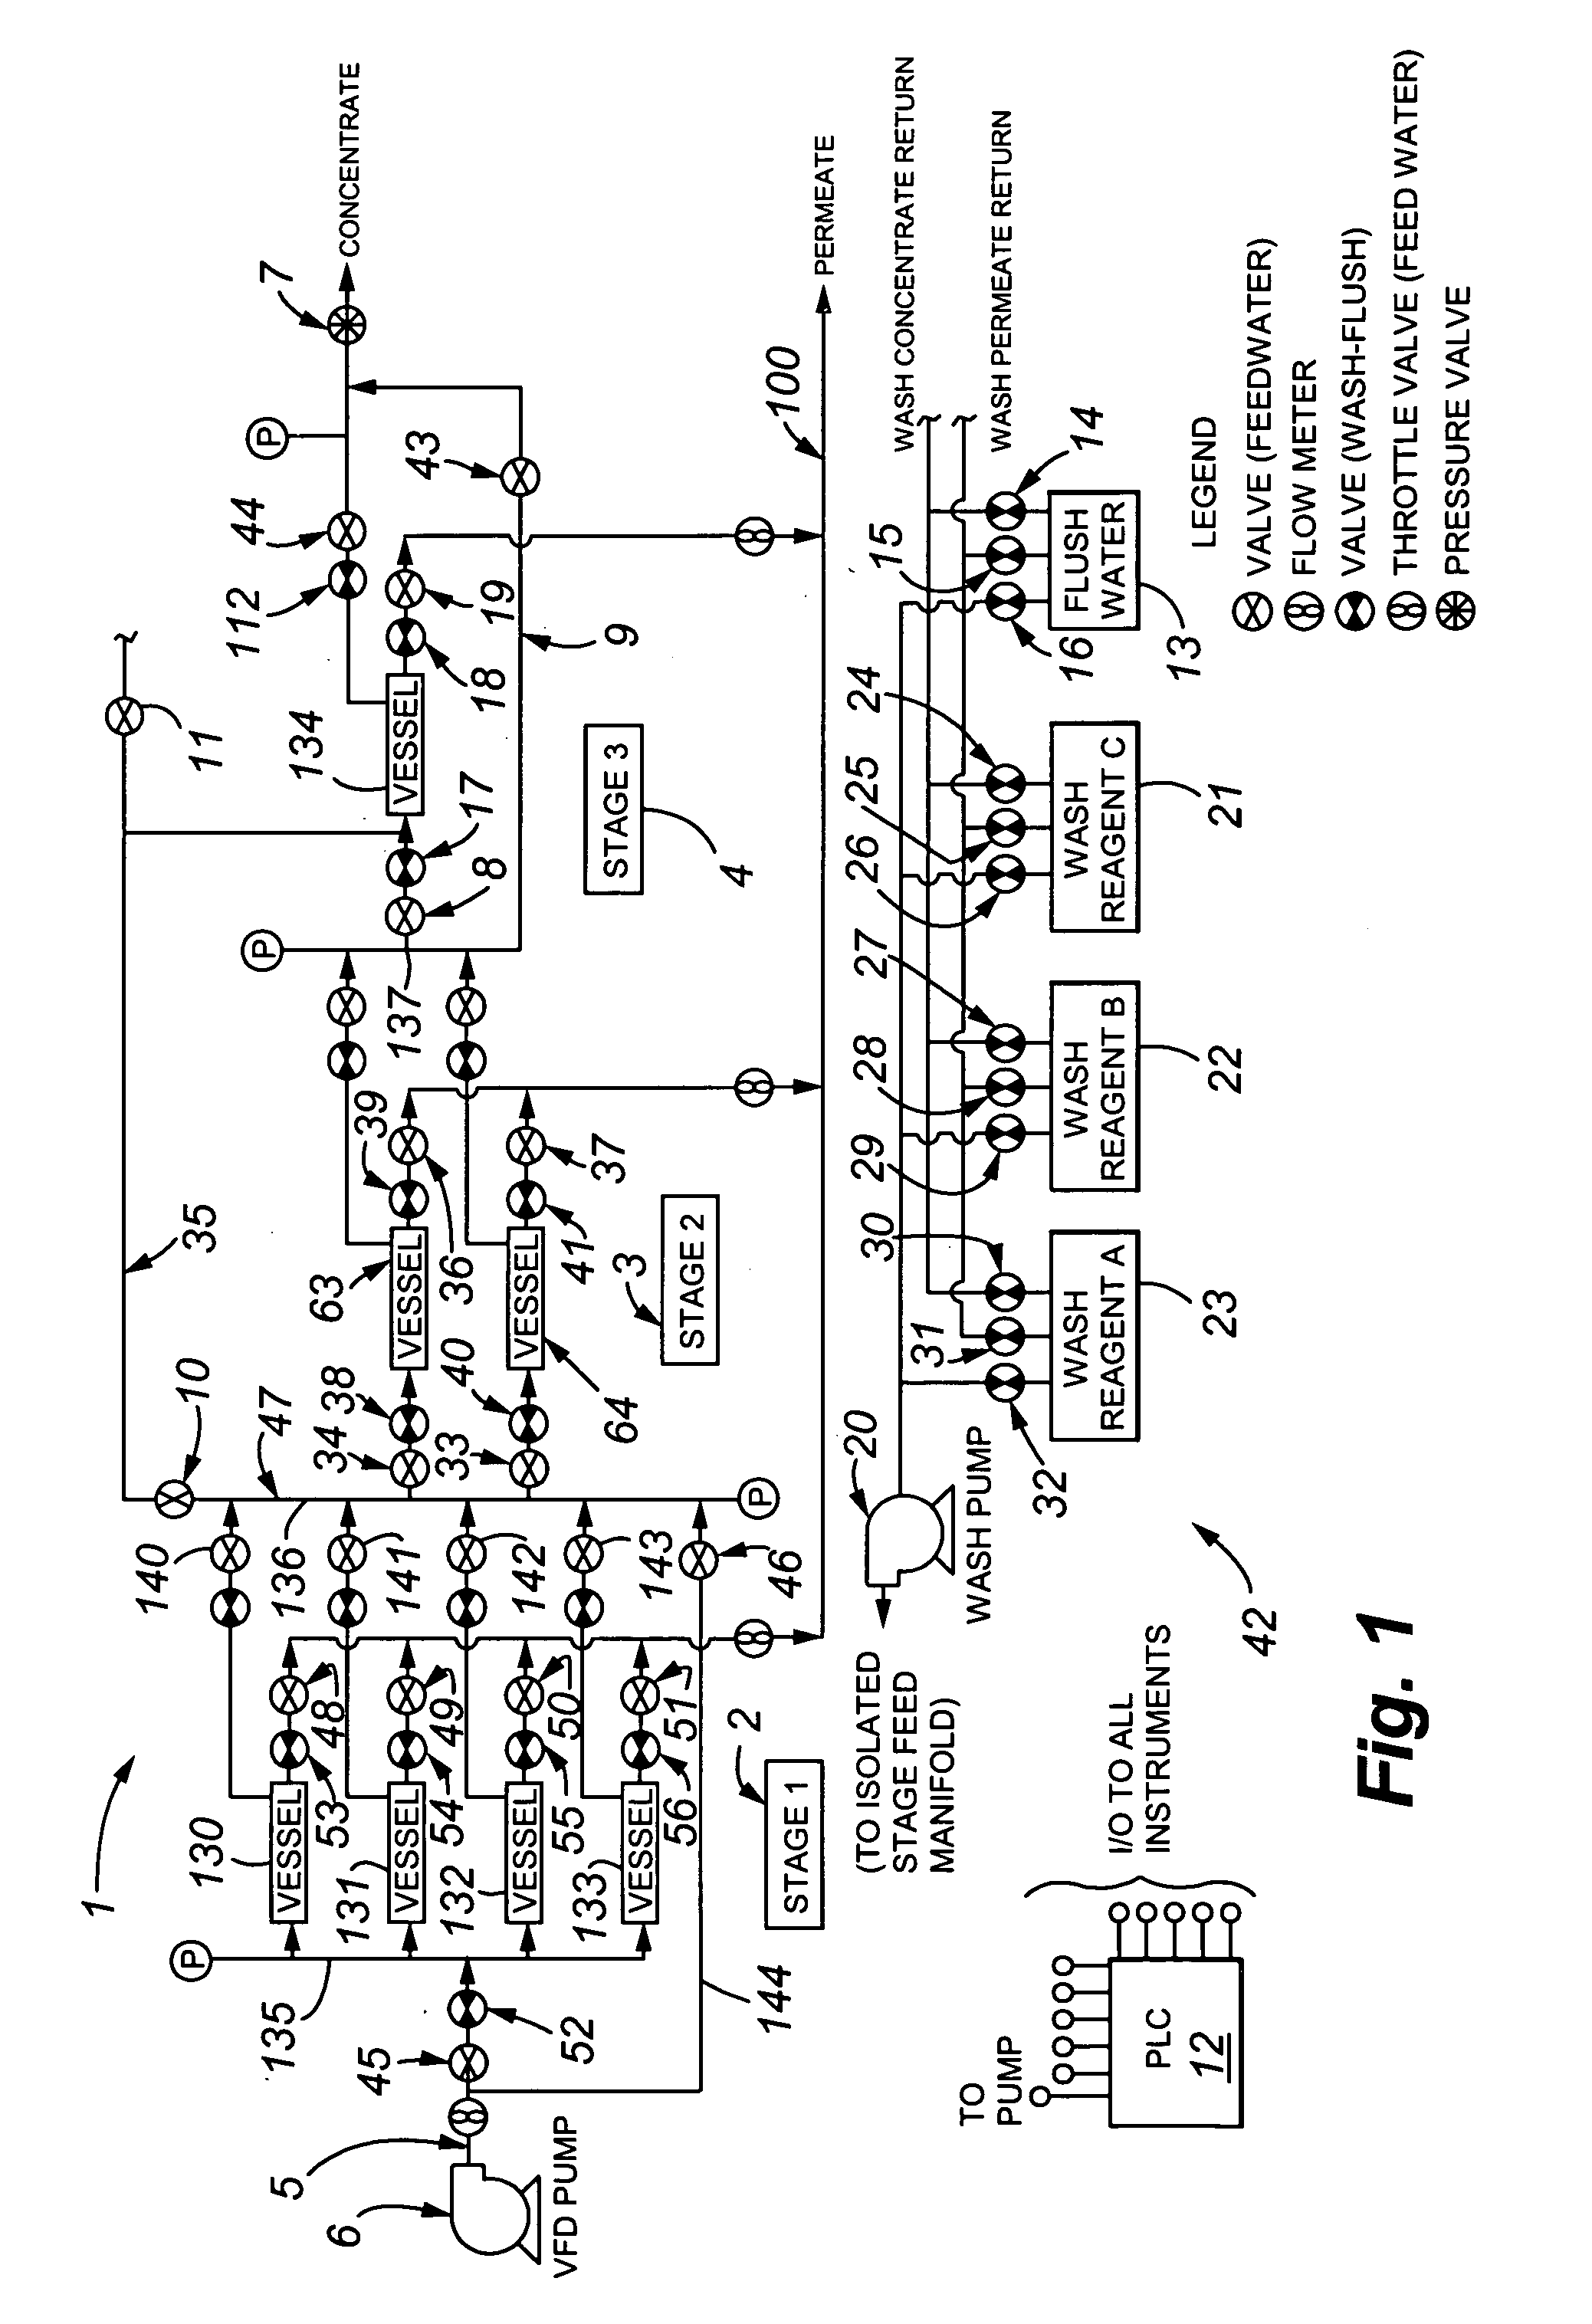 Continuous production membrane water treatment plant and method for operating same